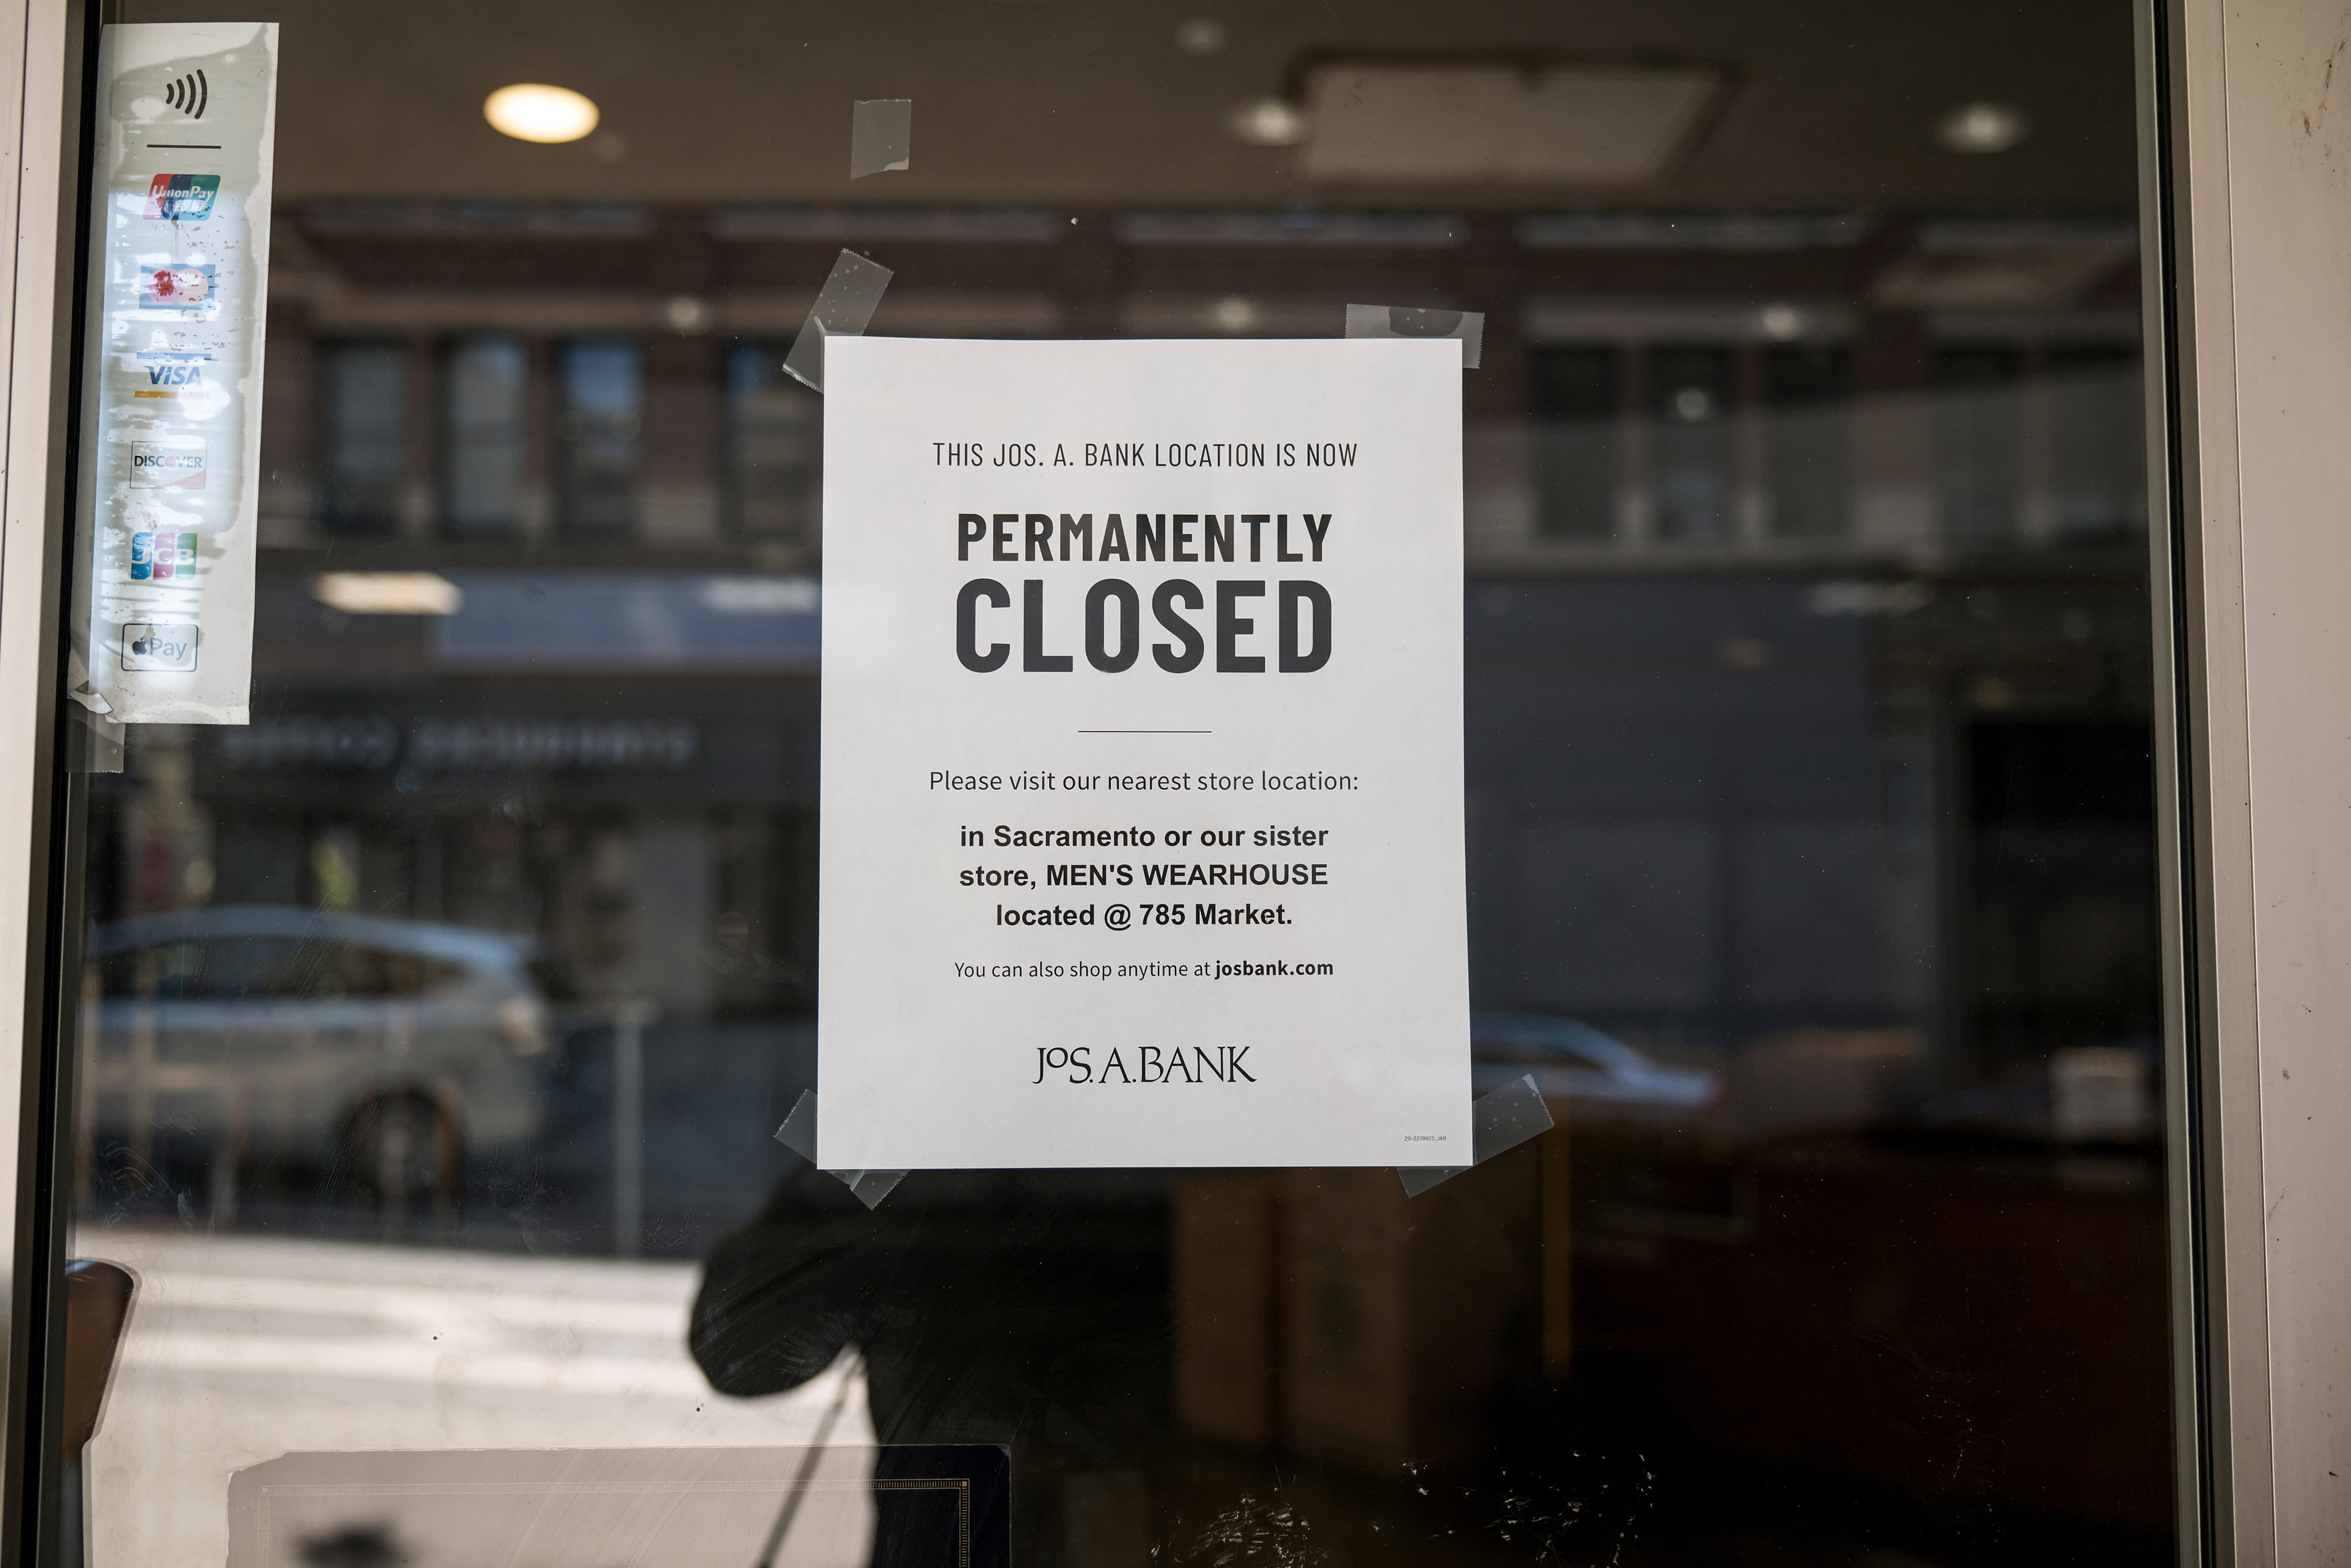 More retail pain ahead: UBS predicts 80,000 stores will close in the U.S. by 2026